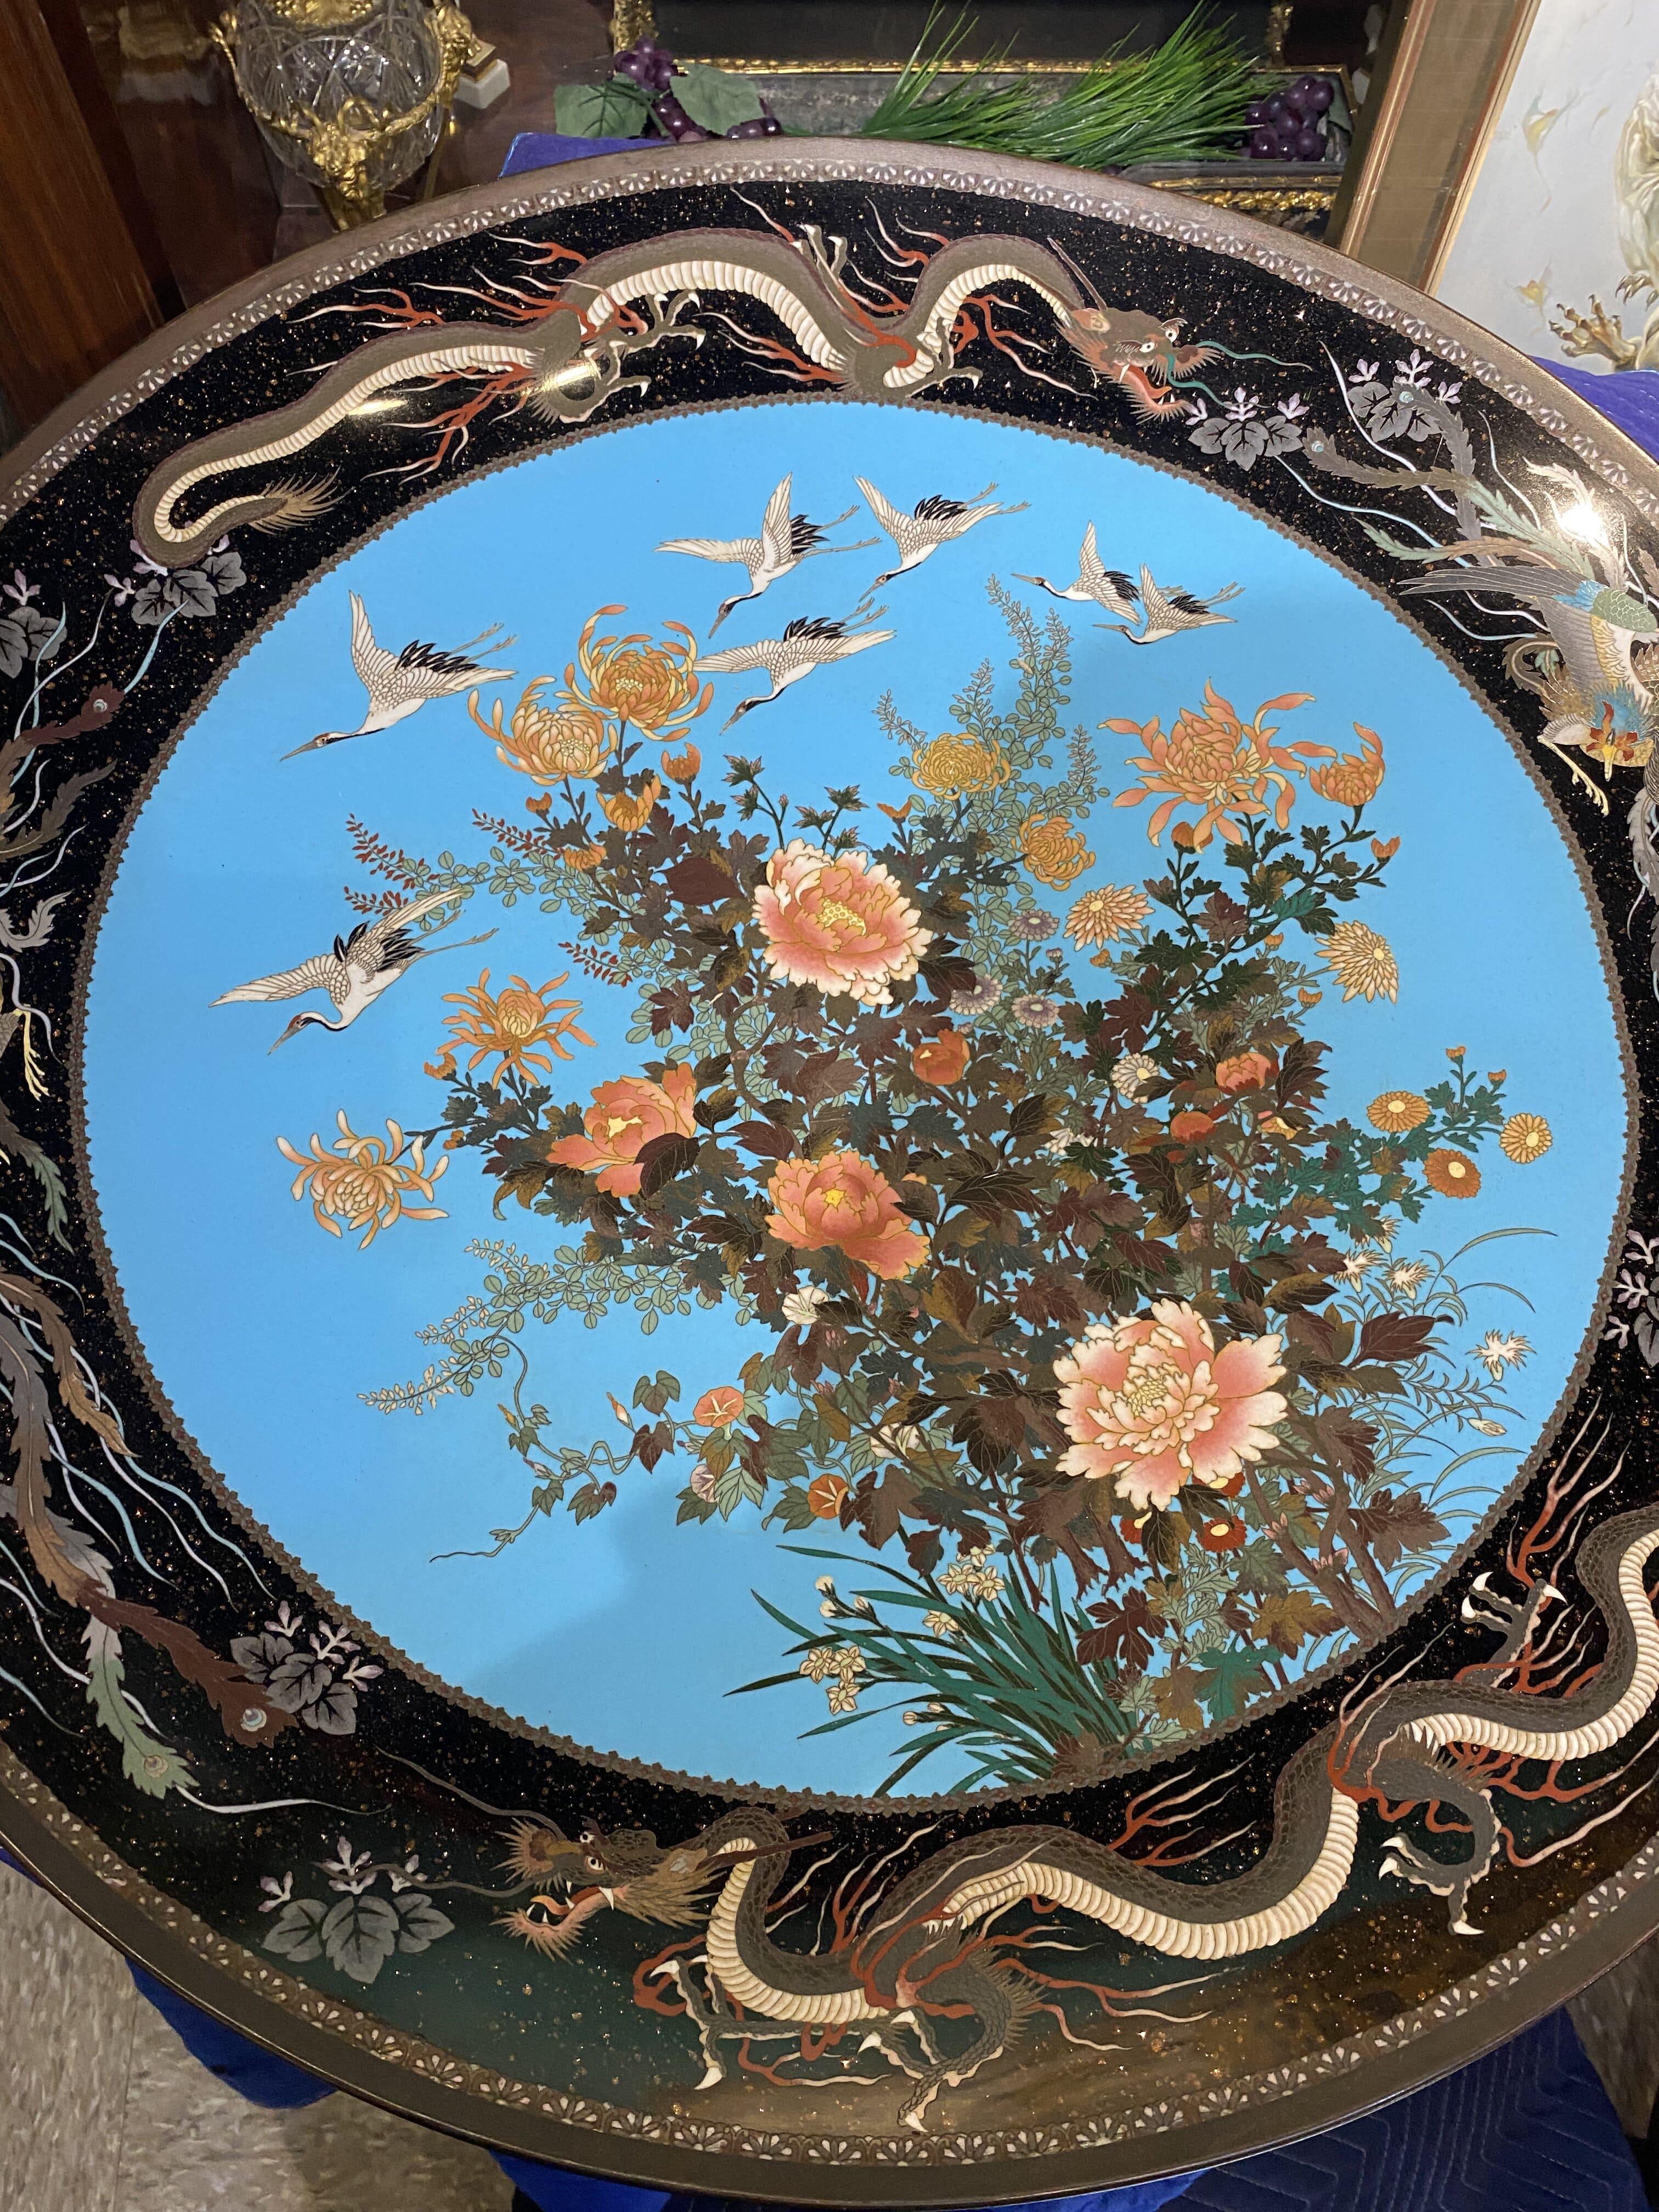 Massive Museum Pair of Meiji Period Japanese Cloisonne Enamel Chargers Plates For Sale 8